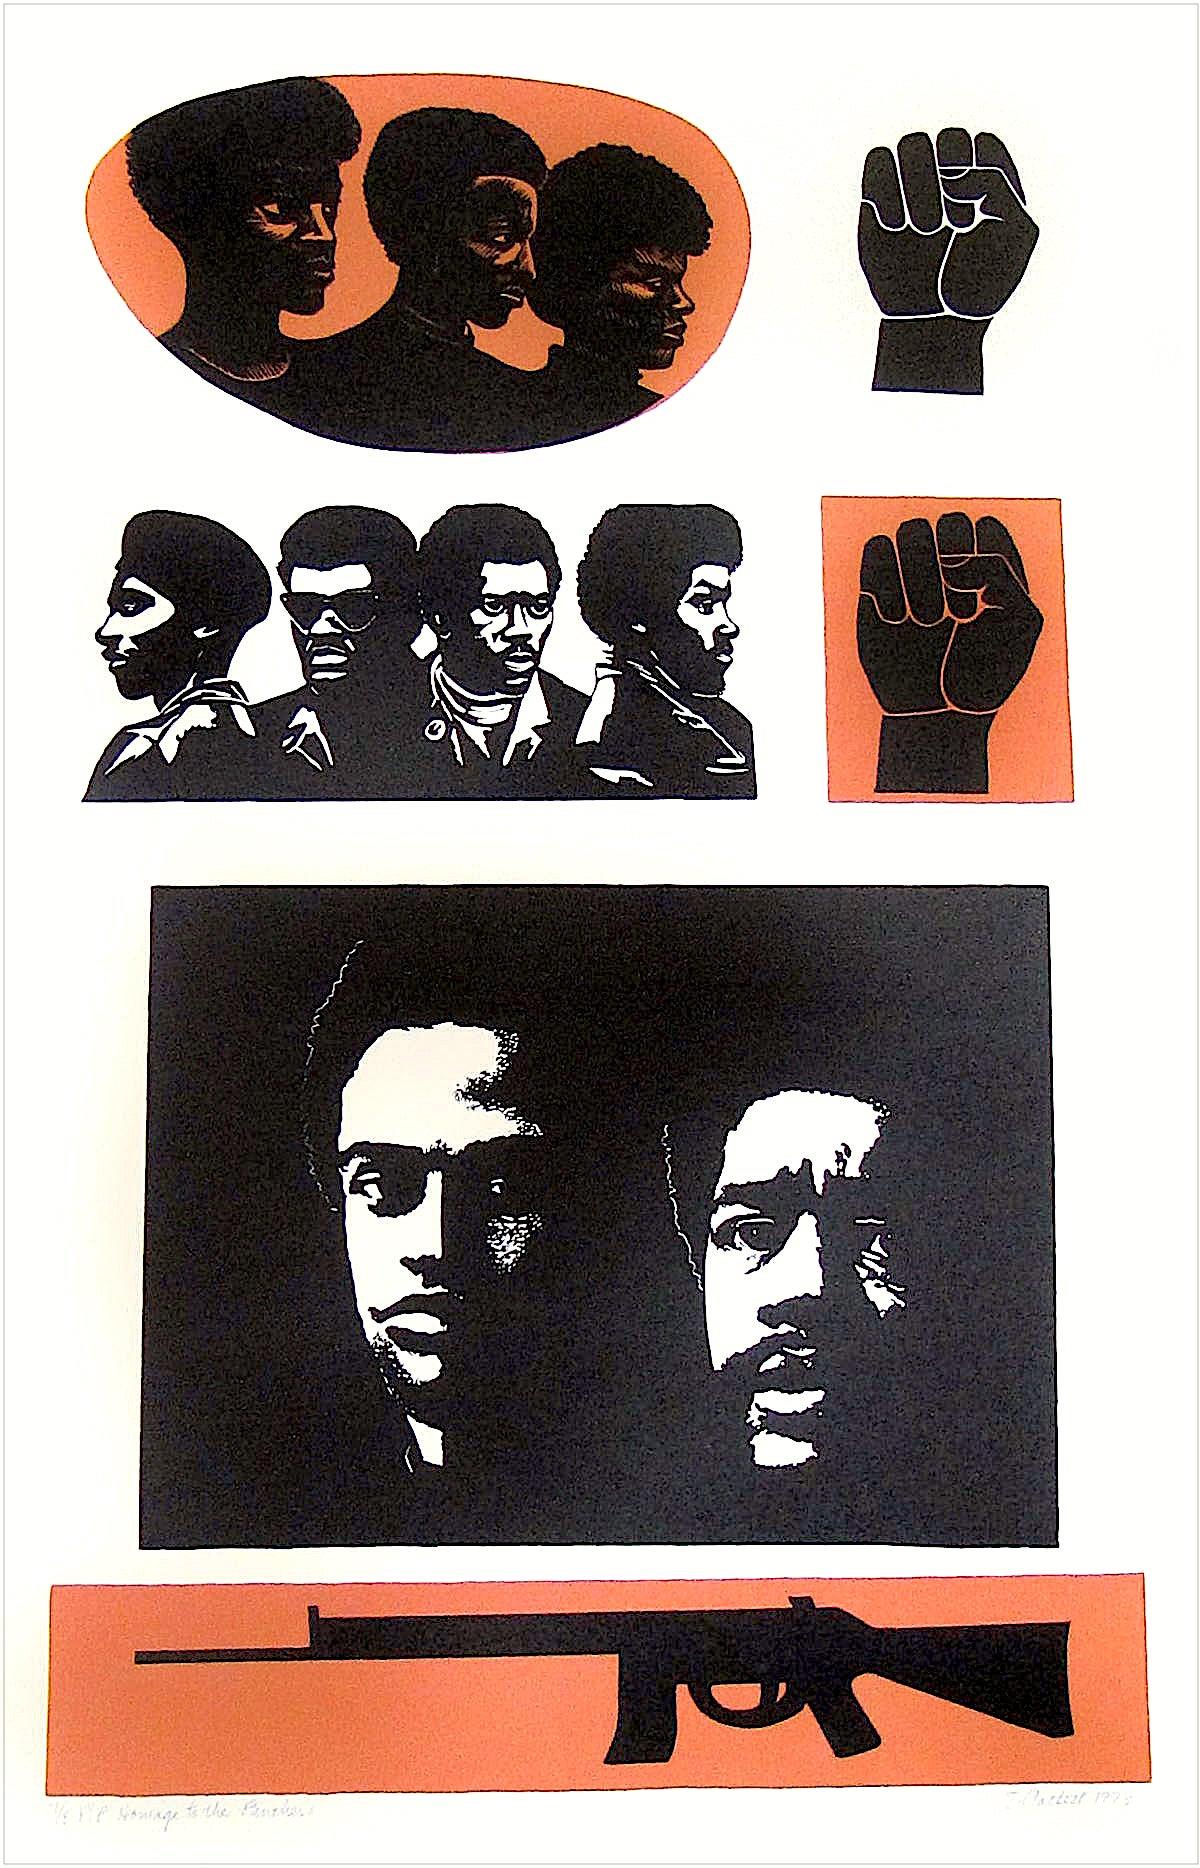 HOMAGE TO THE PANTHERS Signed Lithograph Portrait Black Power Movement, Activism